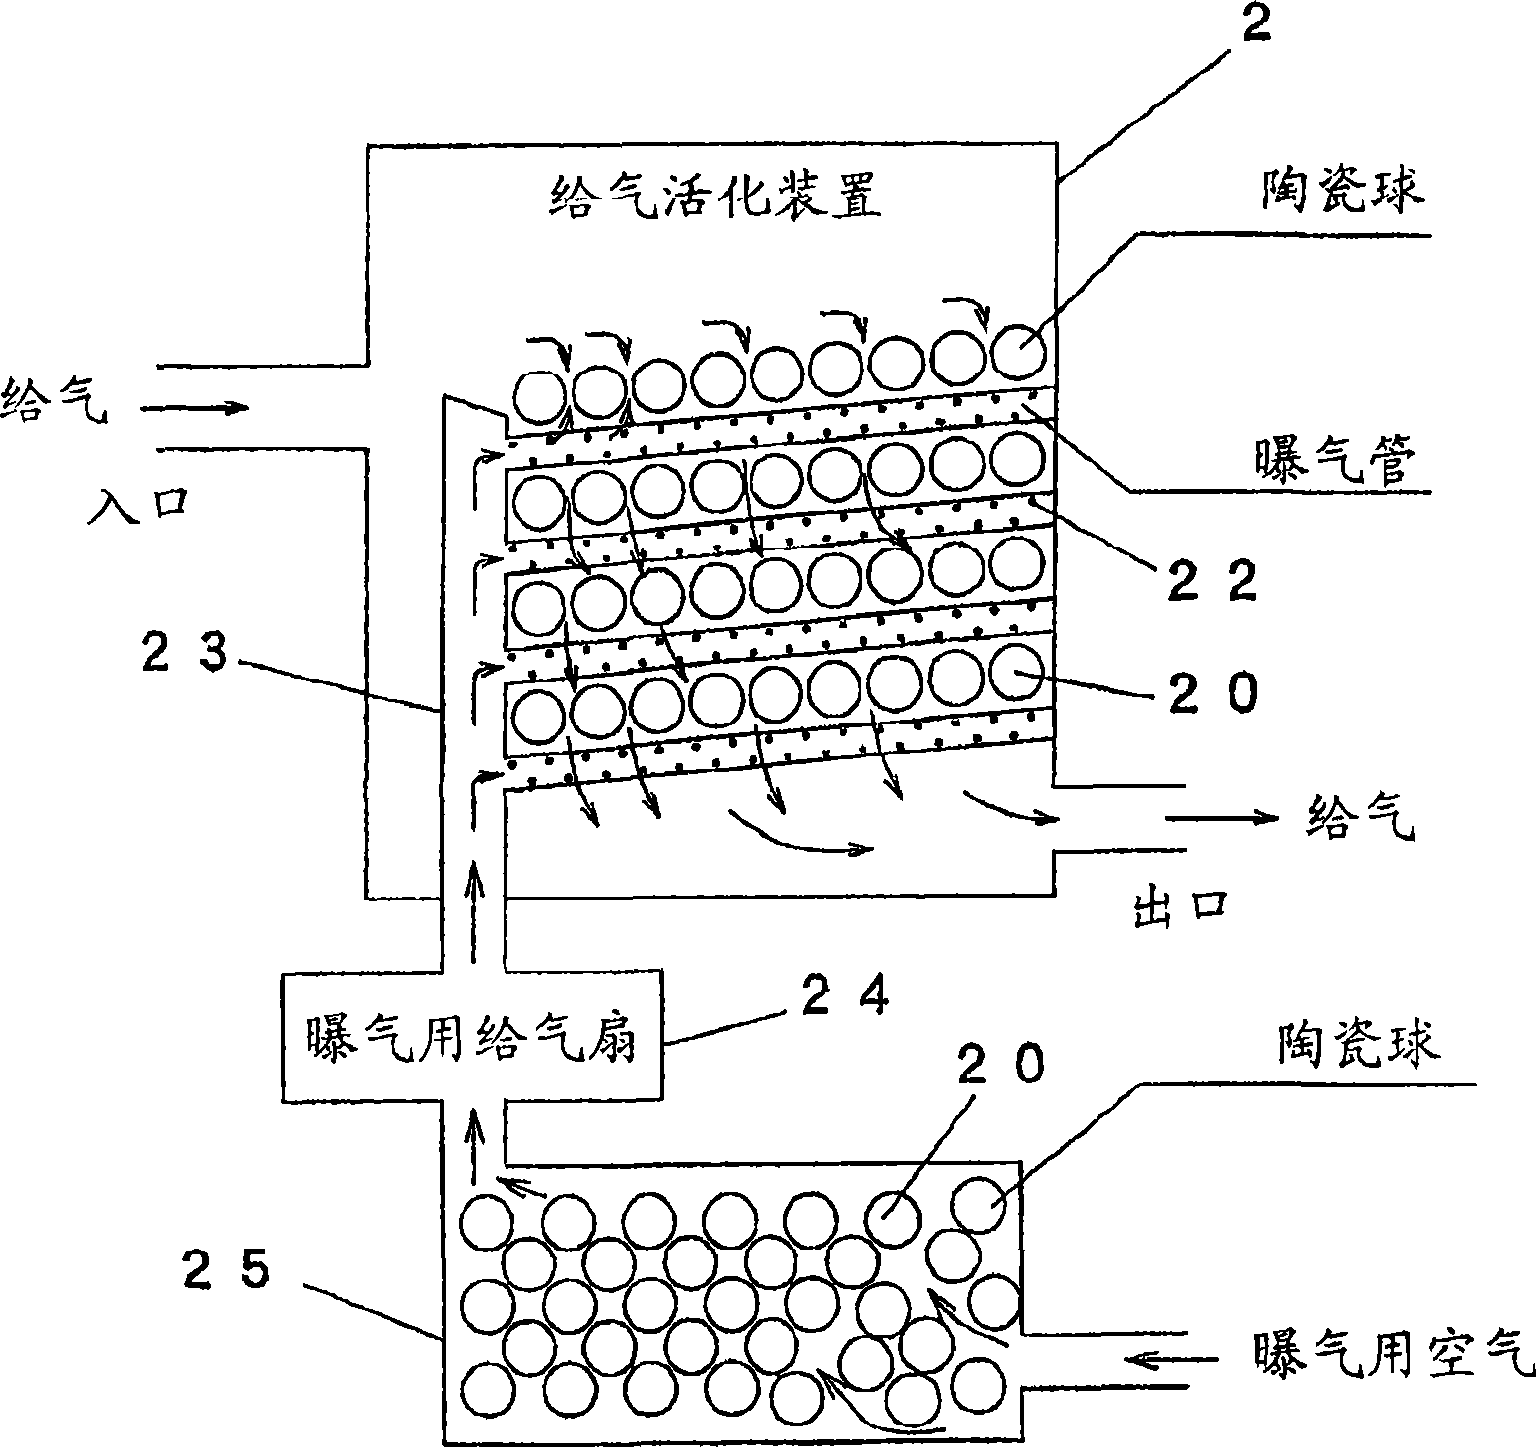 Method and apparatus for utilizing alpha decay radiation energy in electric power generating system